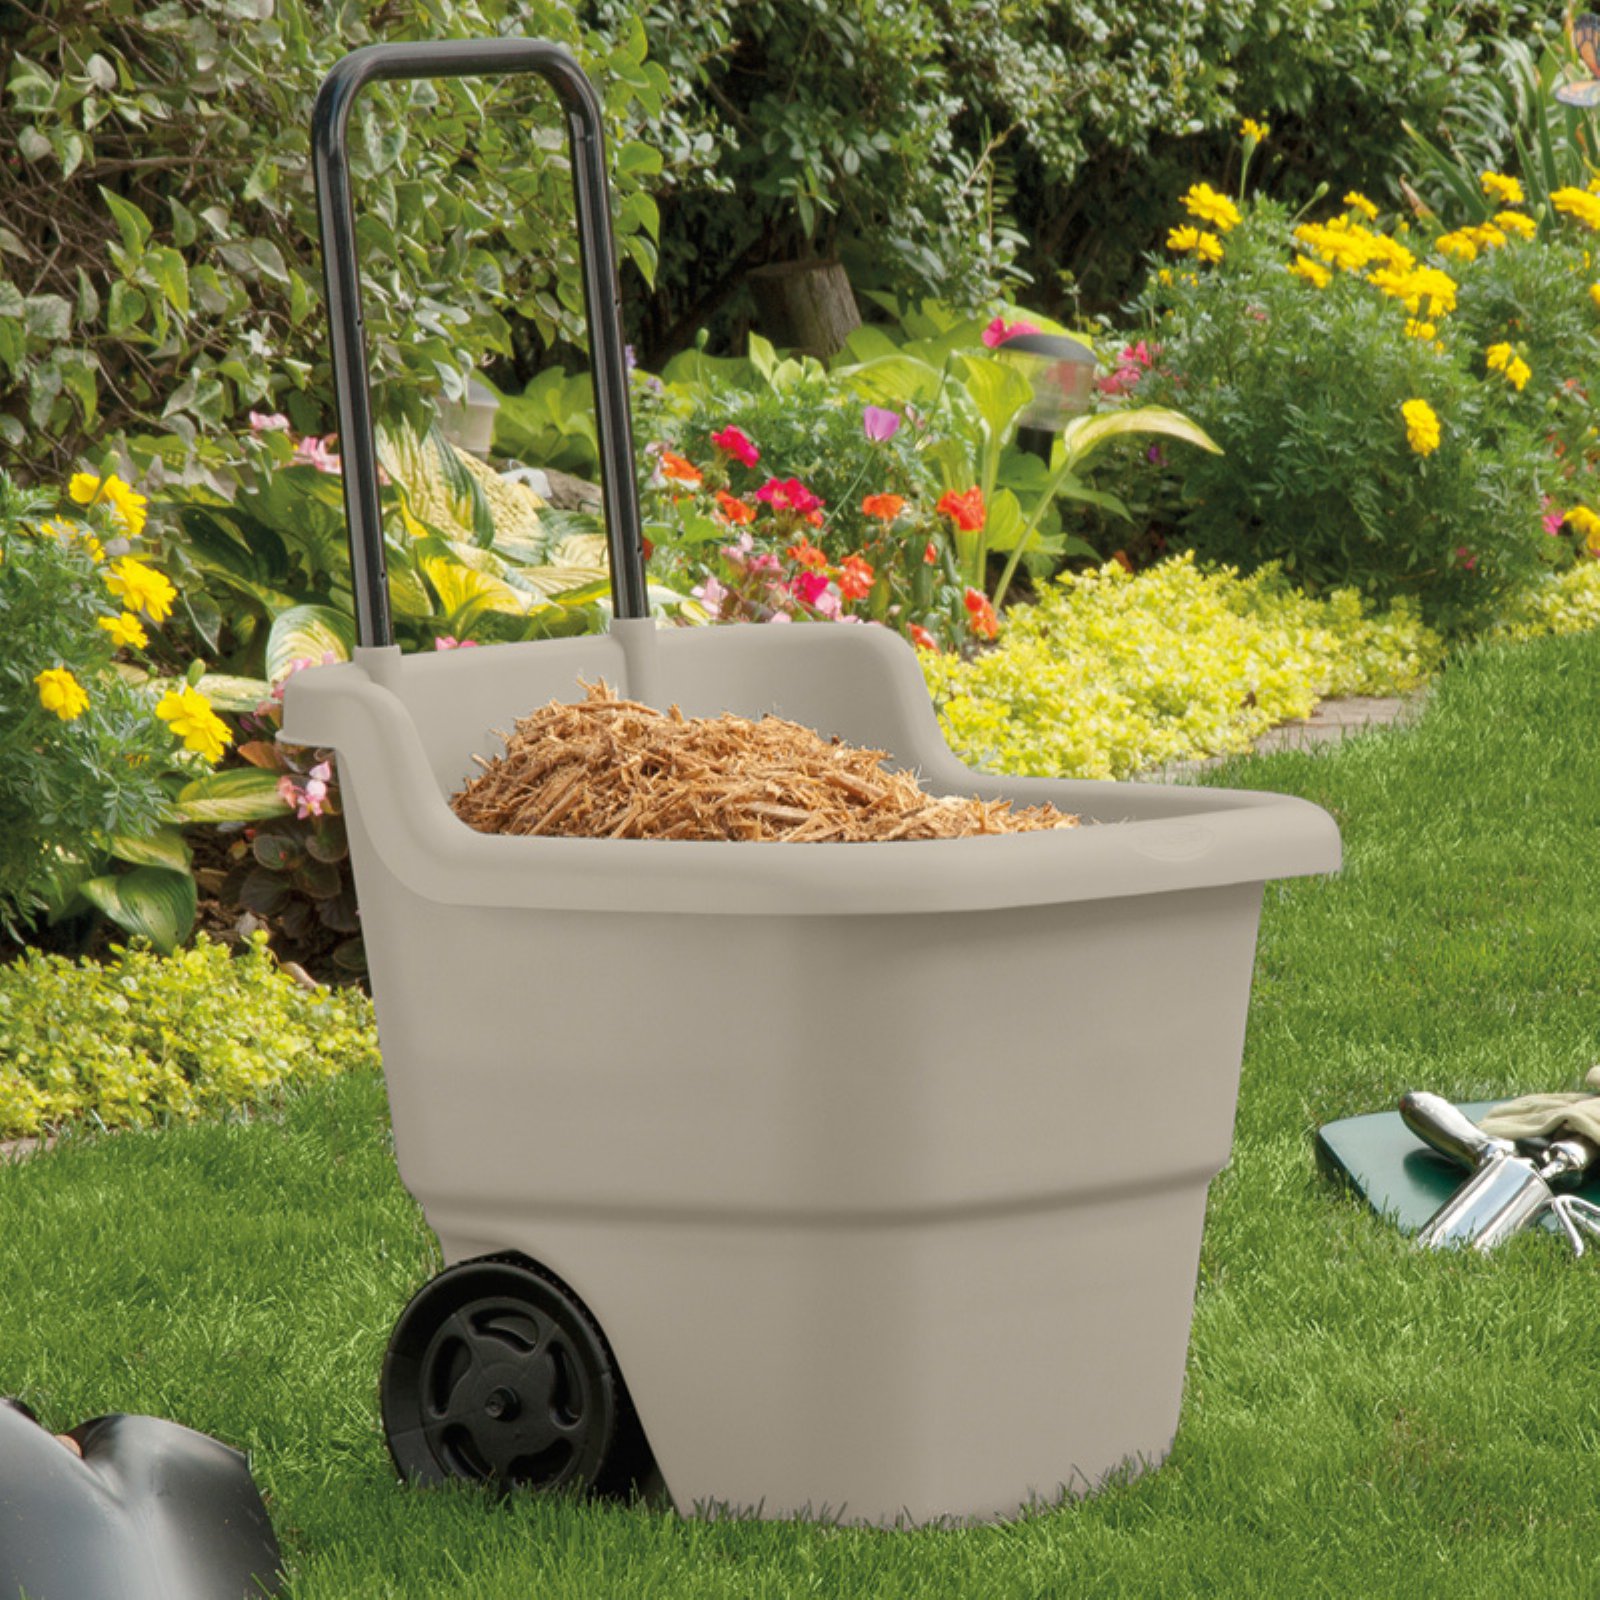 Suncast 15 Gallon Resin Rolling Lawn and Utility Cart, 20.75 in D x 35.75 in H x 22.5 in W - image 4 of 9